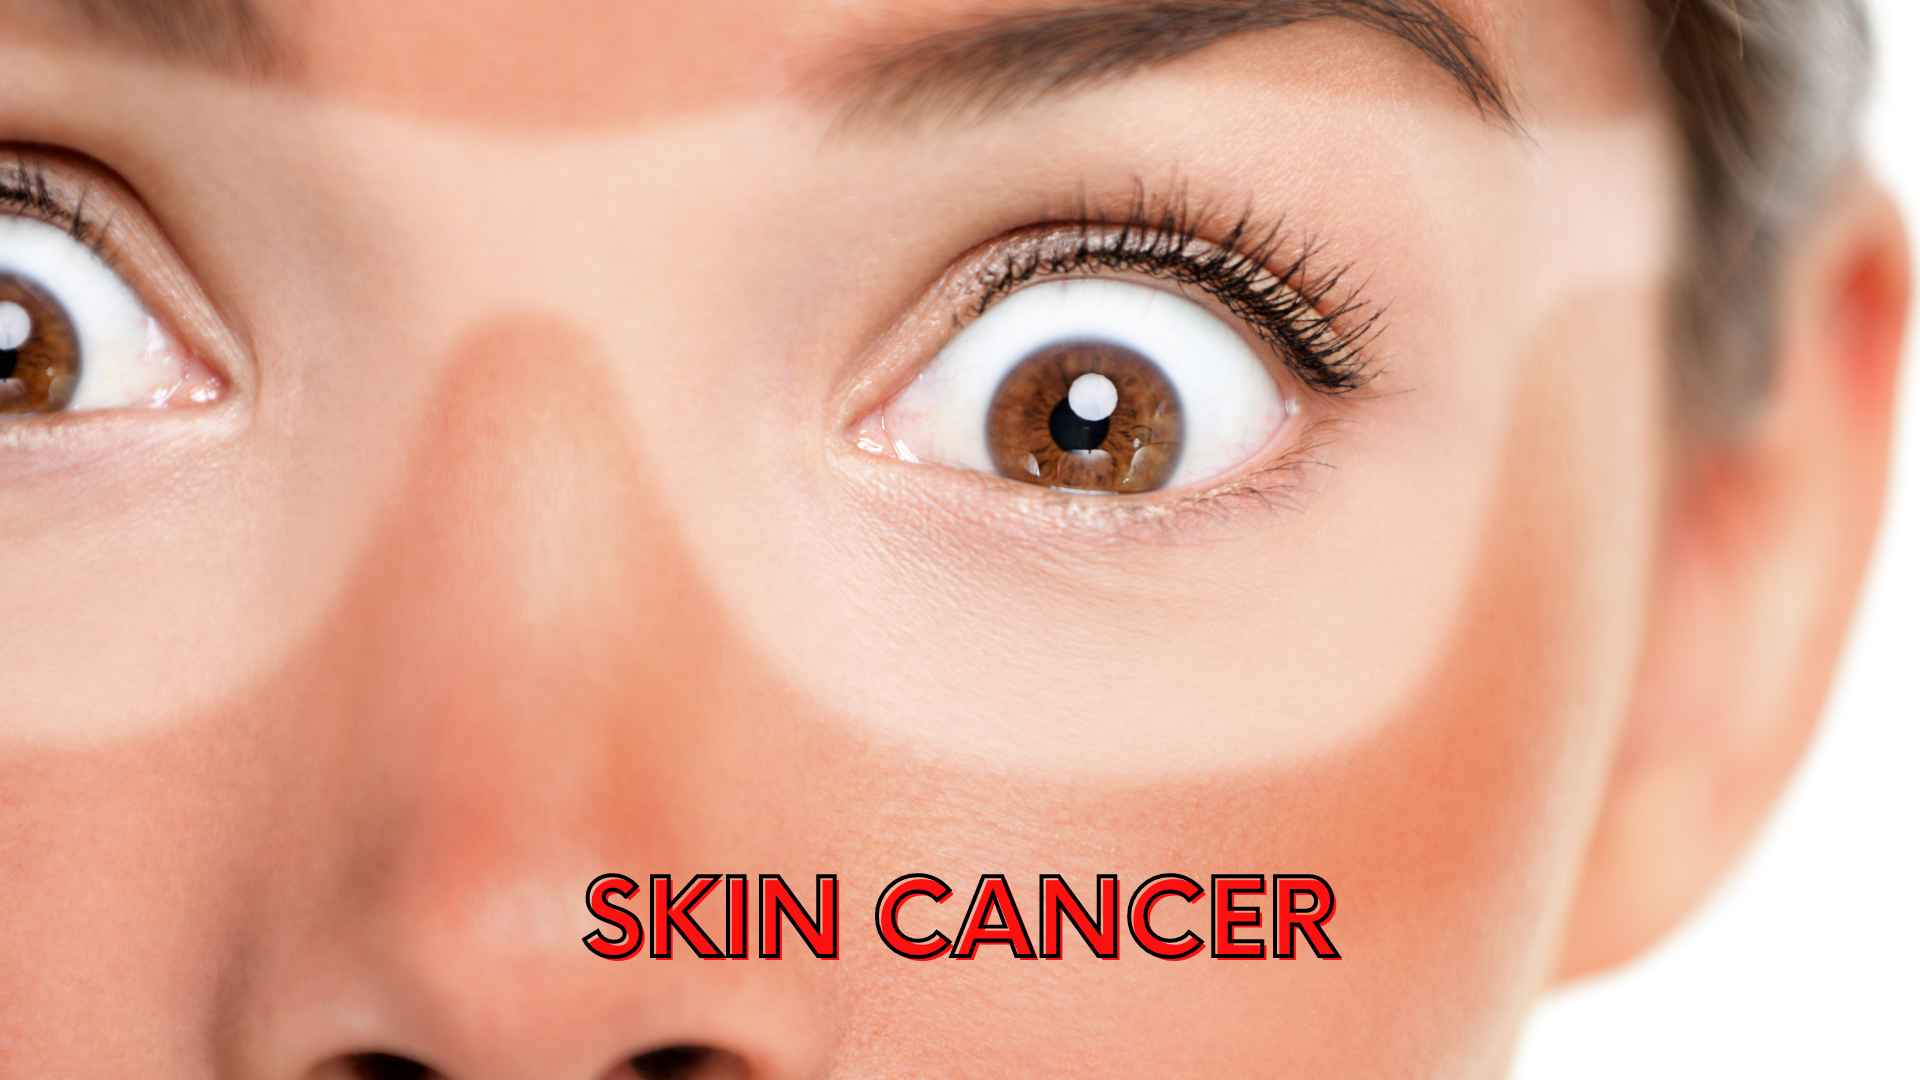 Skin cancer of the face.